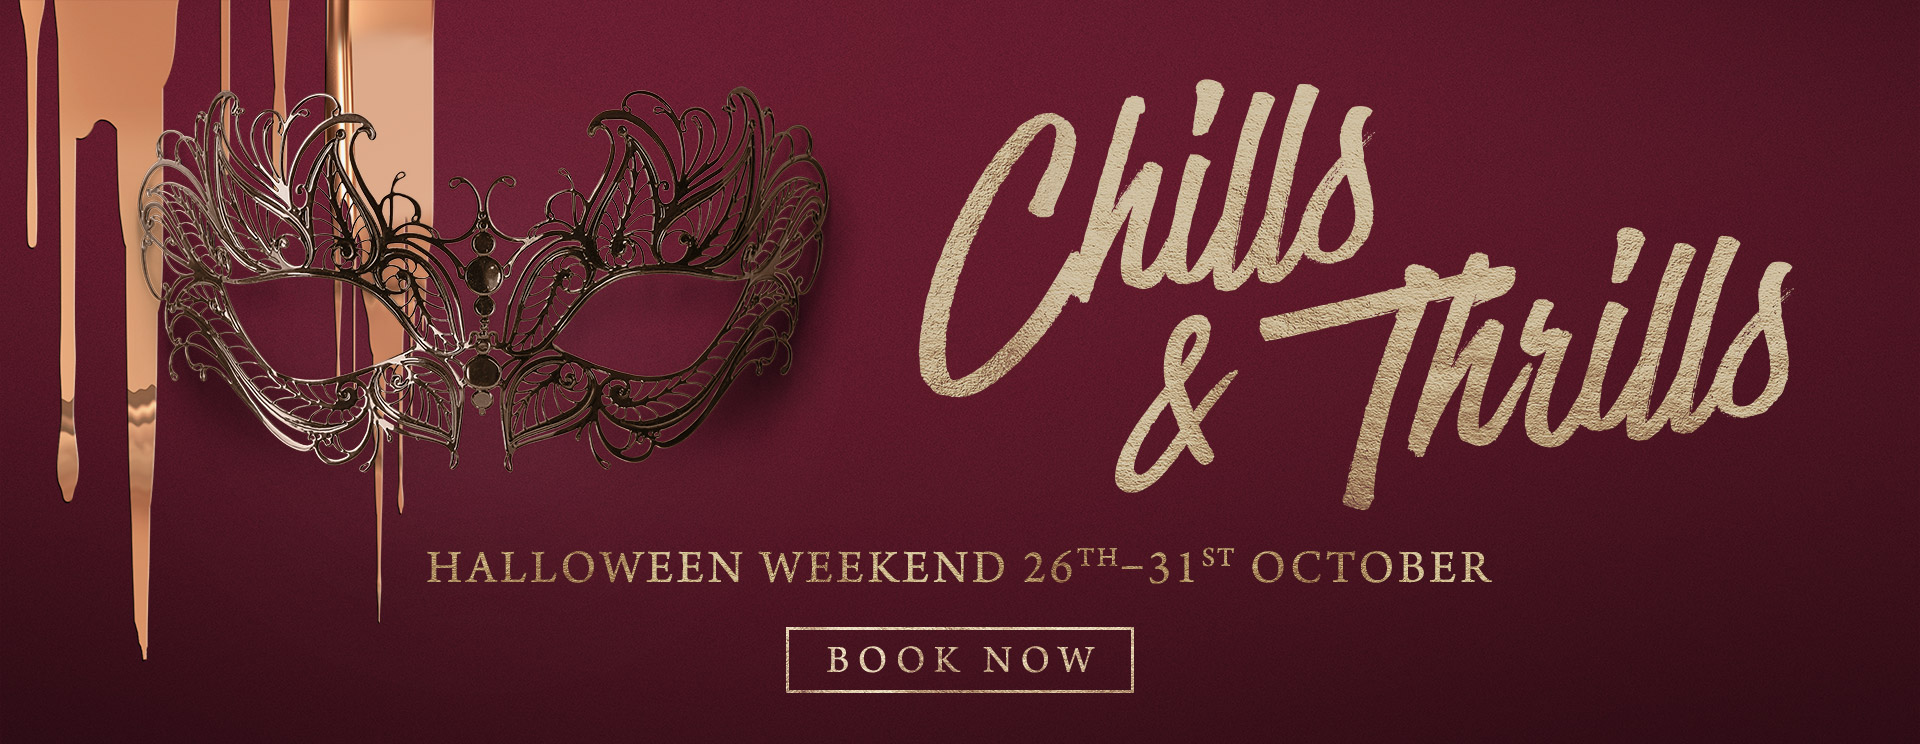 Chills & Thrills this Halloween at The Anchor Inn